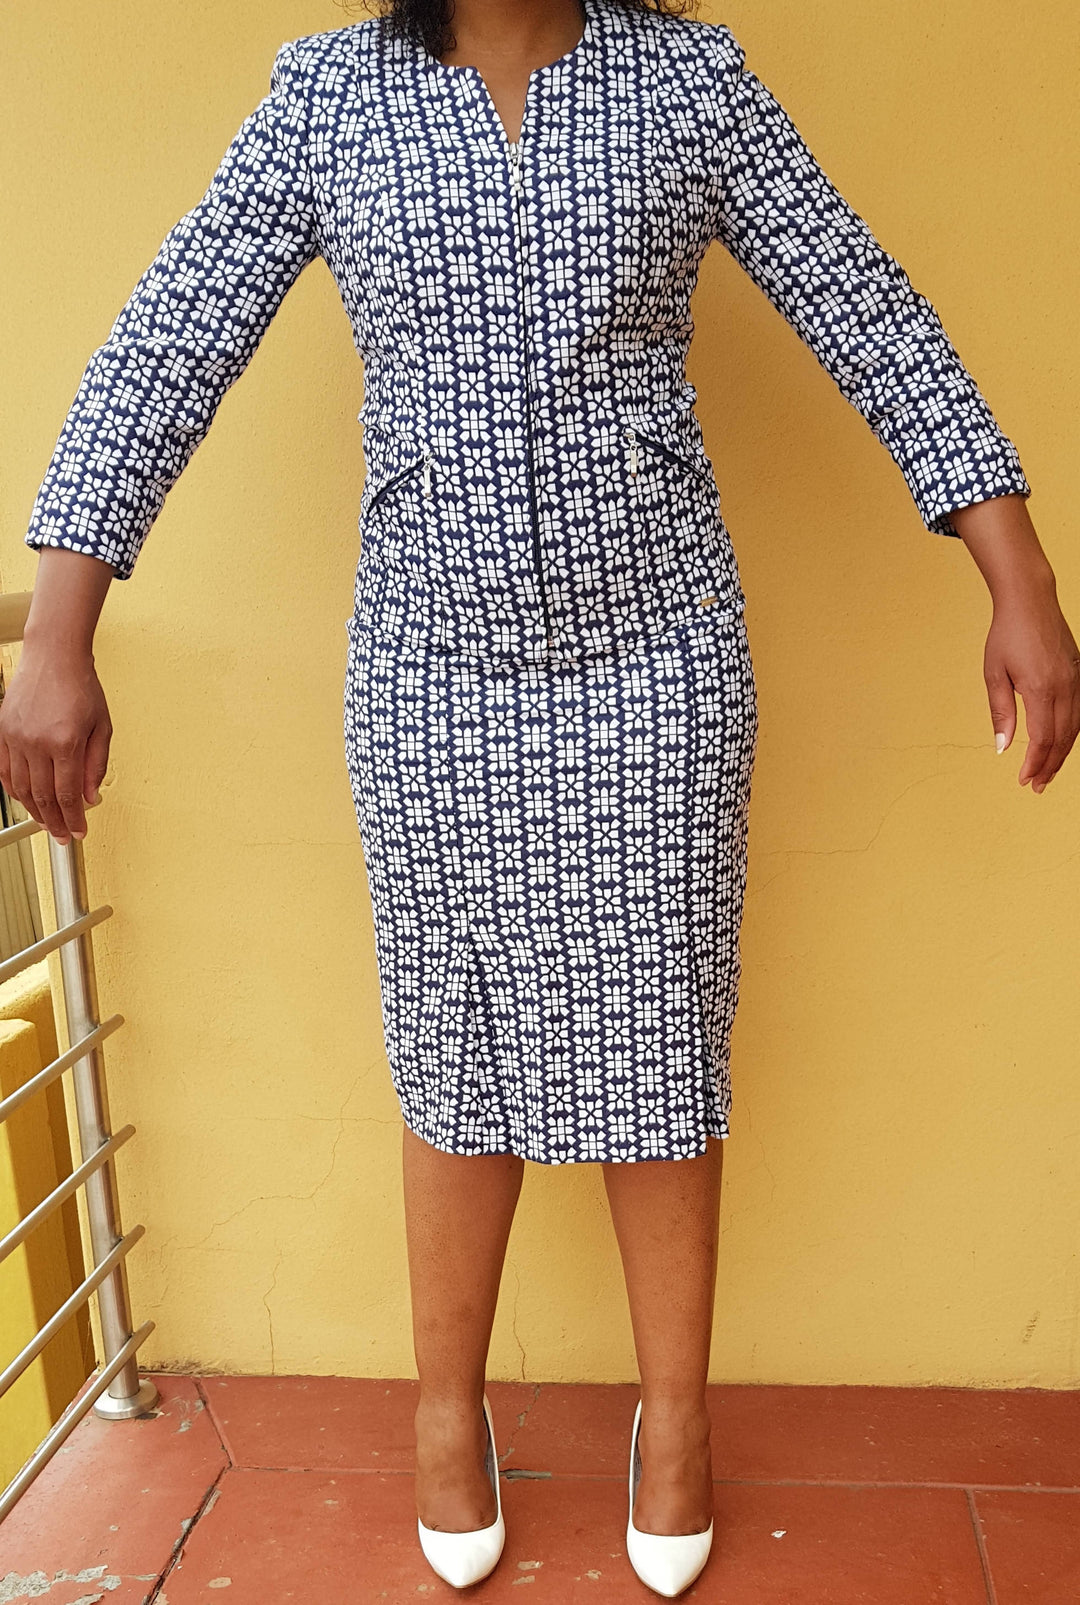 2 Piece lady's formal skirt and jacket